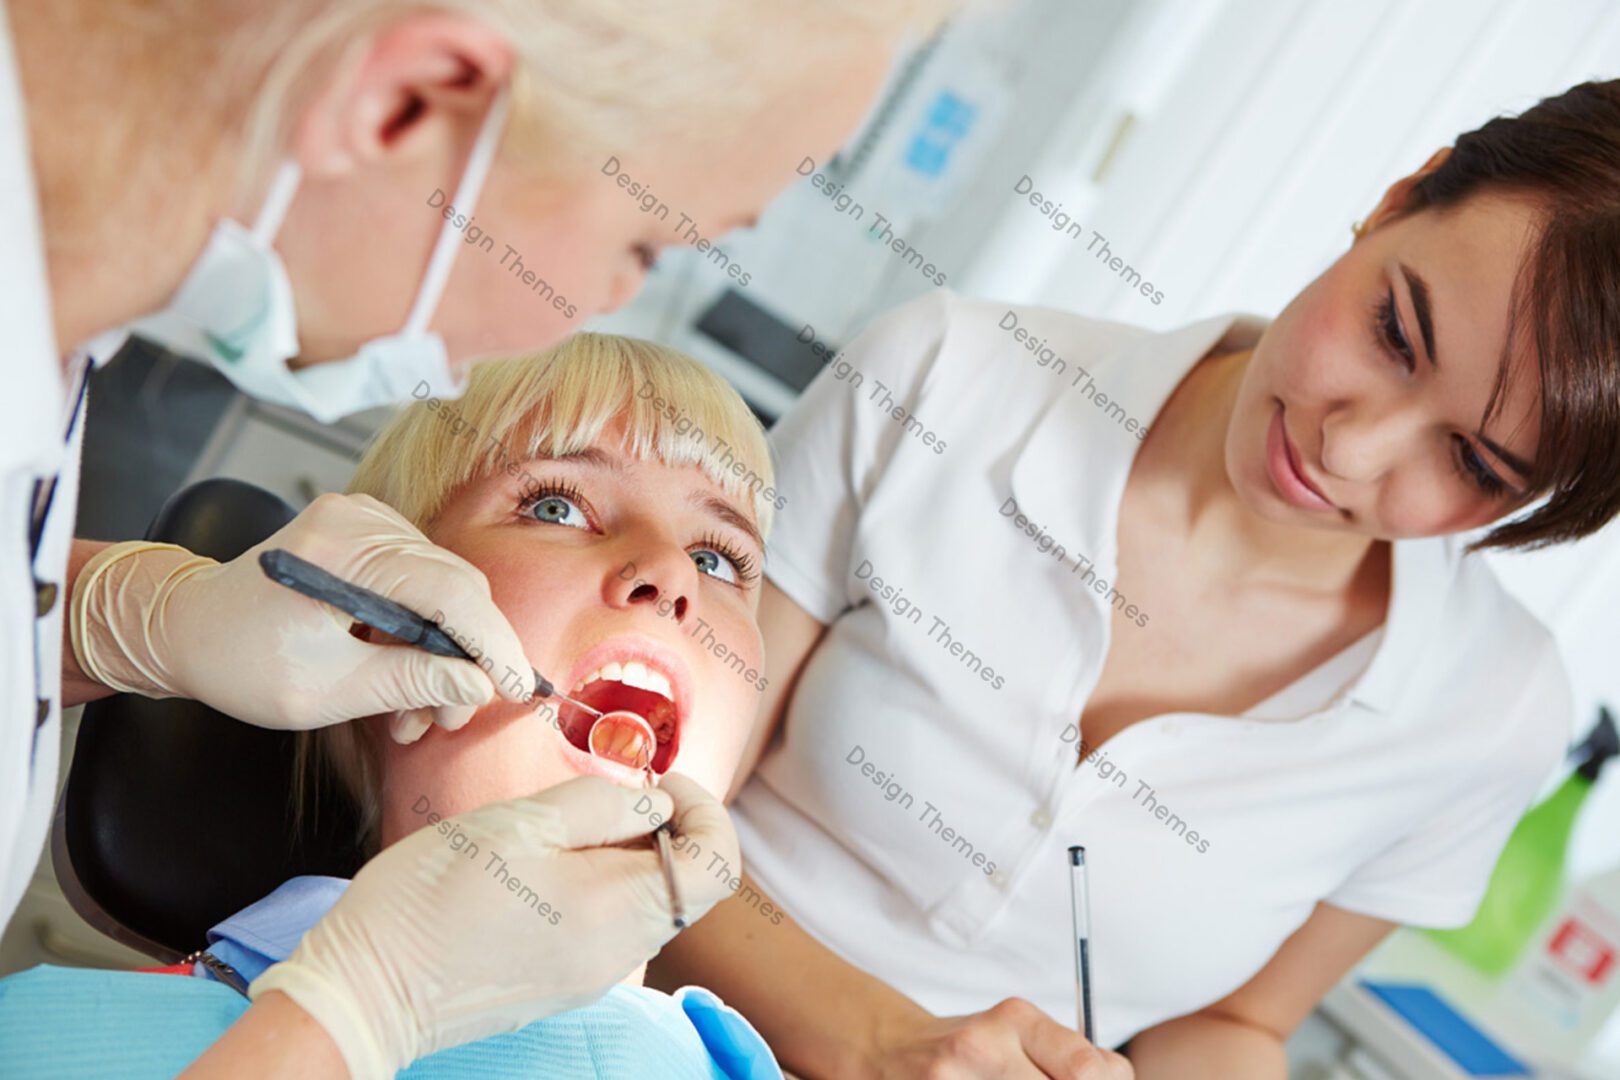 A woman getting her teeth checked by two dentists.